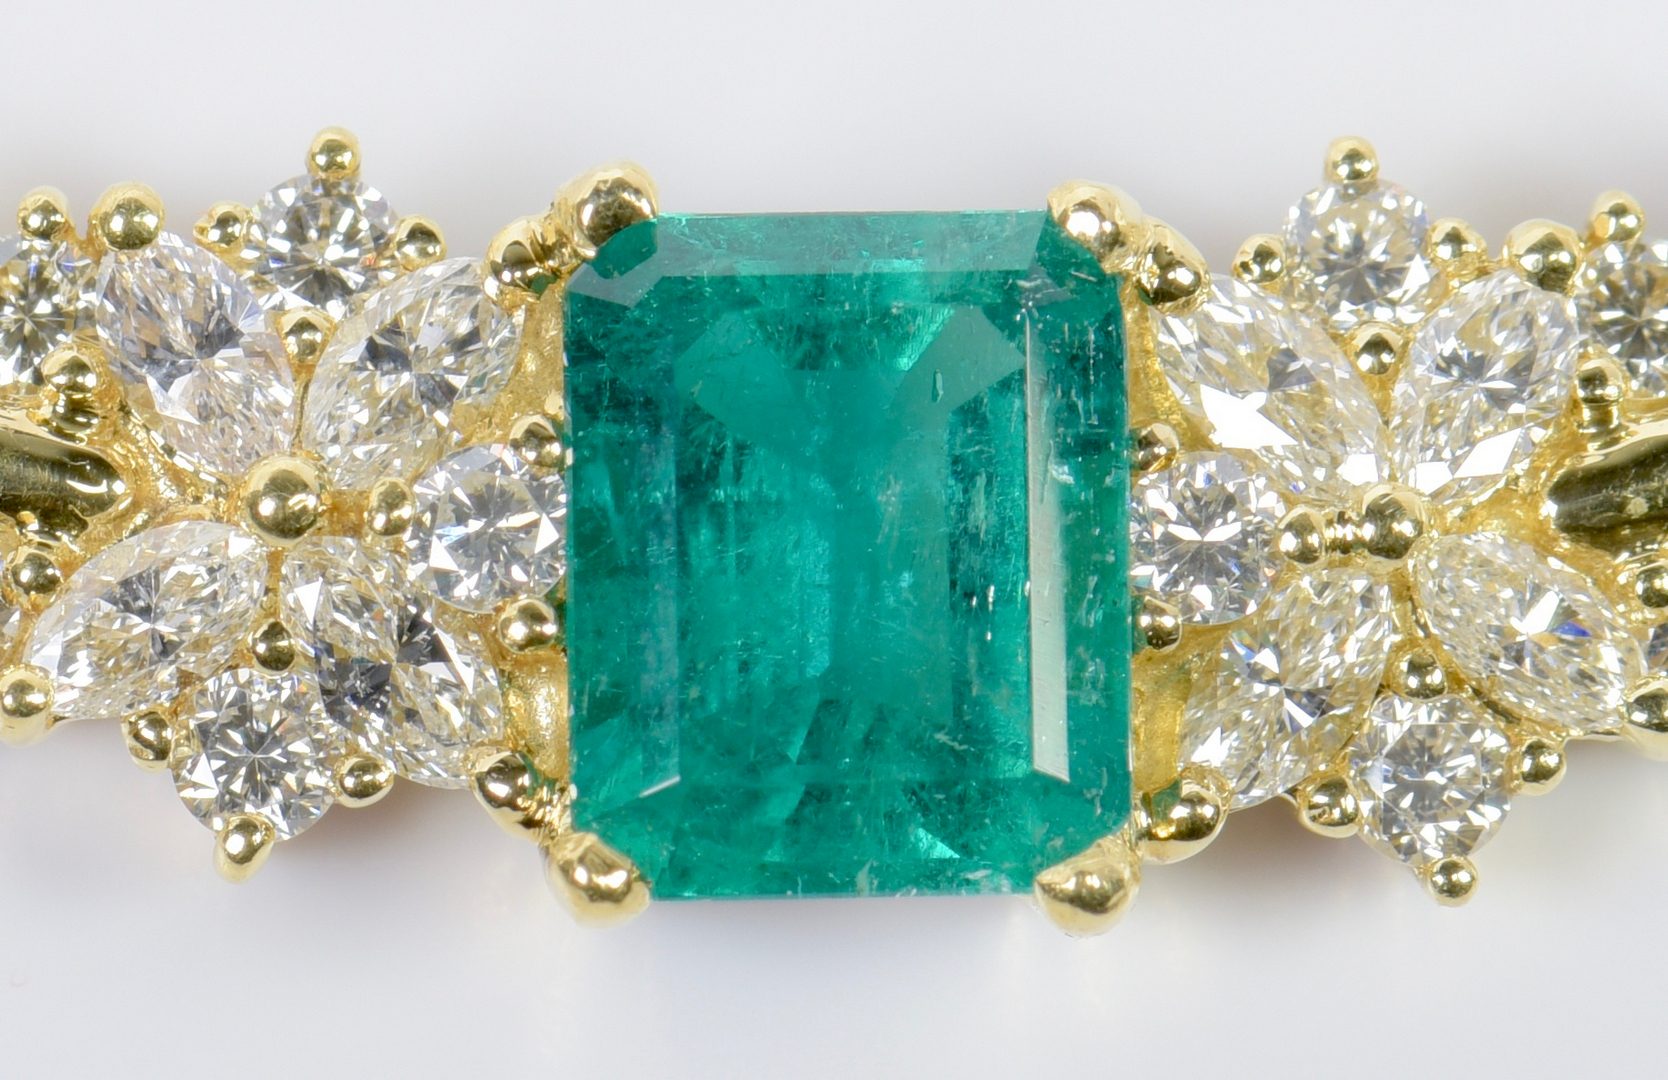 Lot 76: 18K Emerald and Diamond Necklace